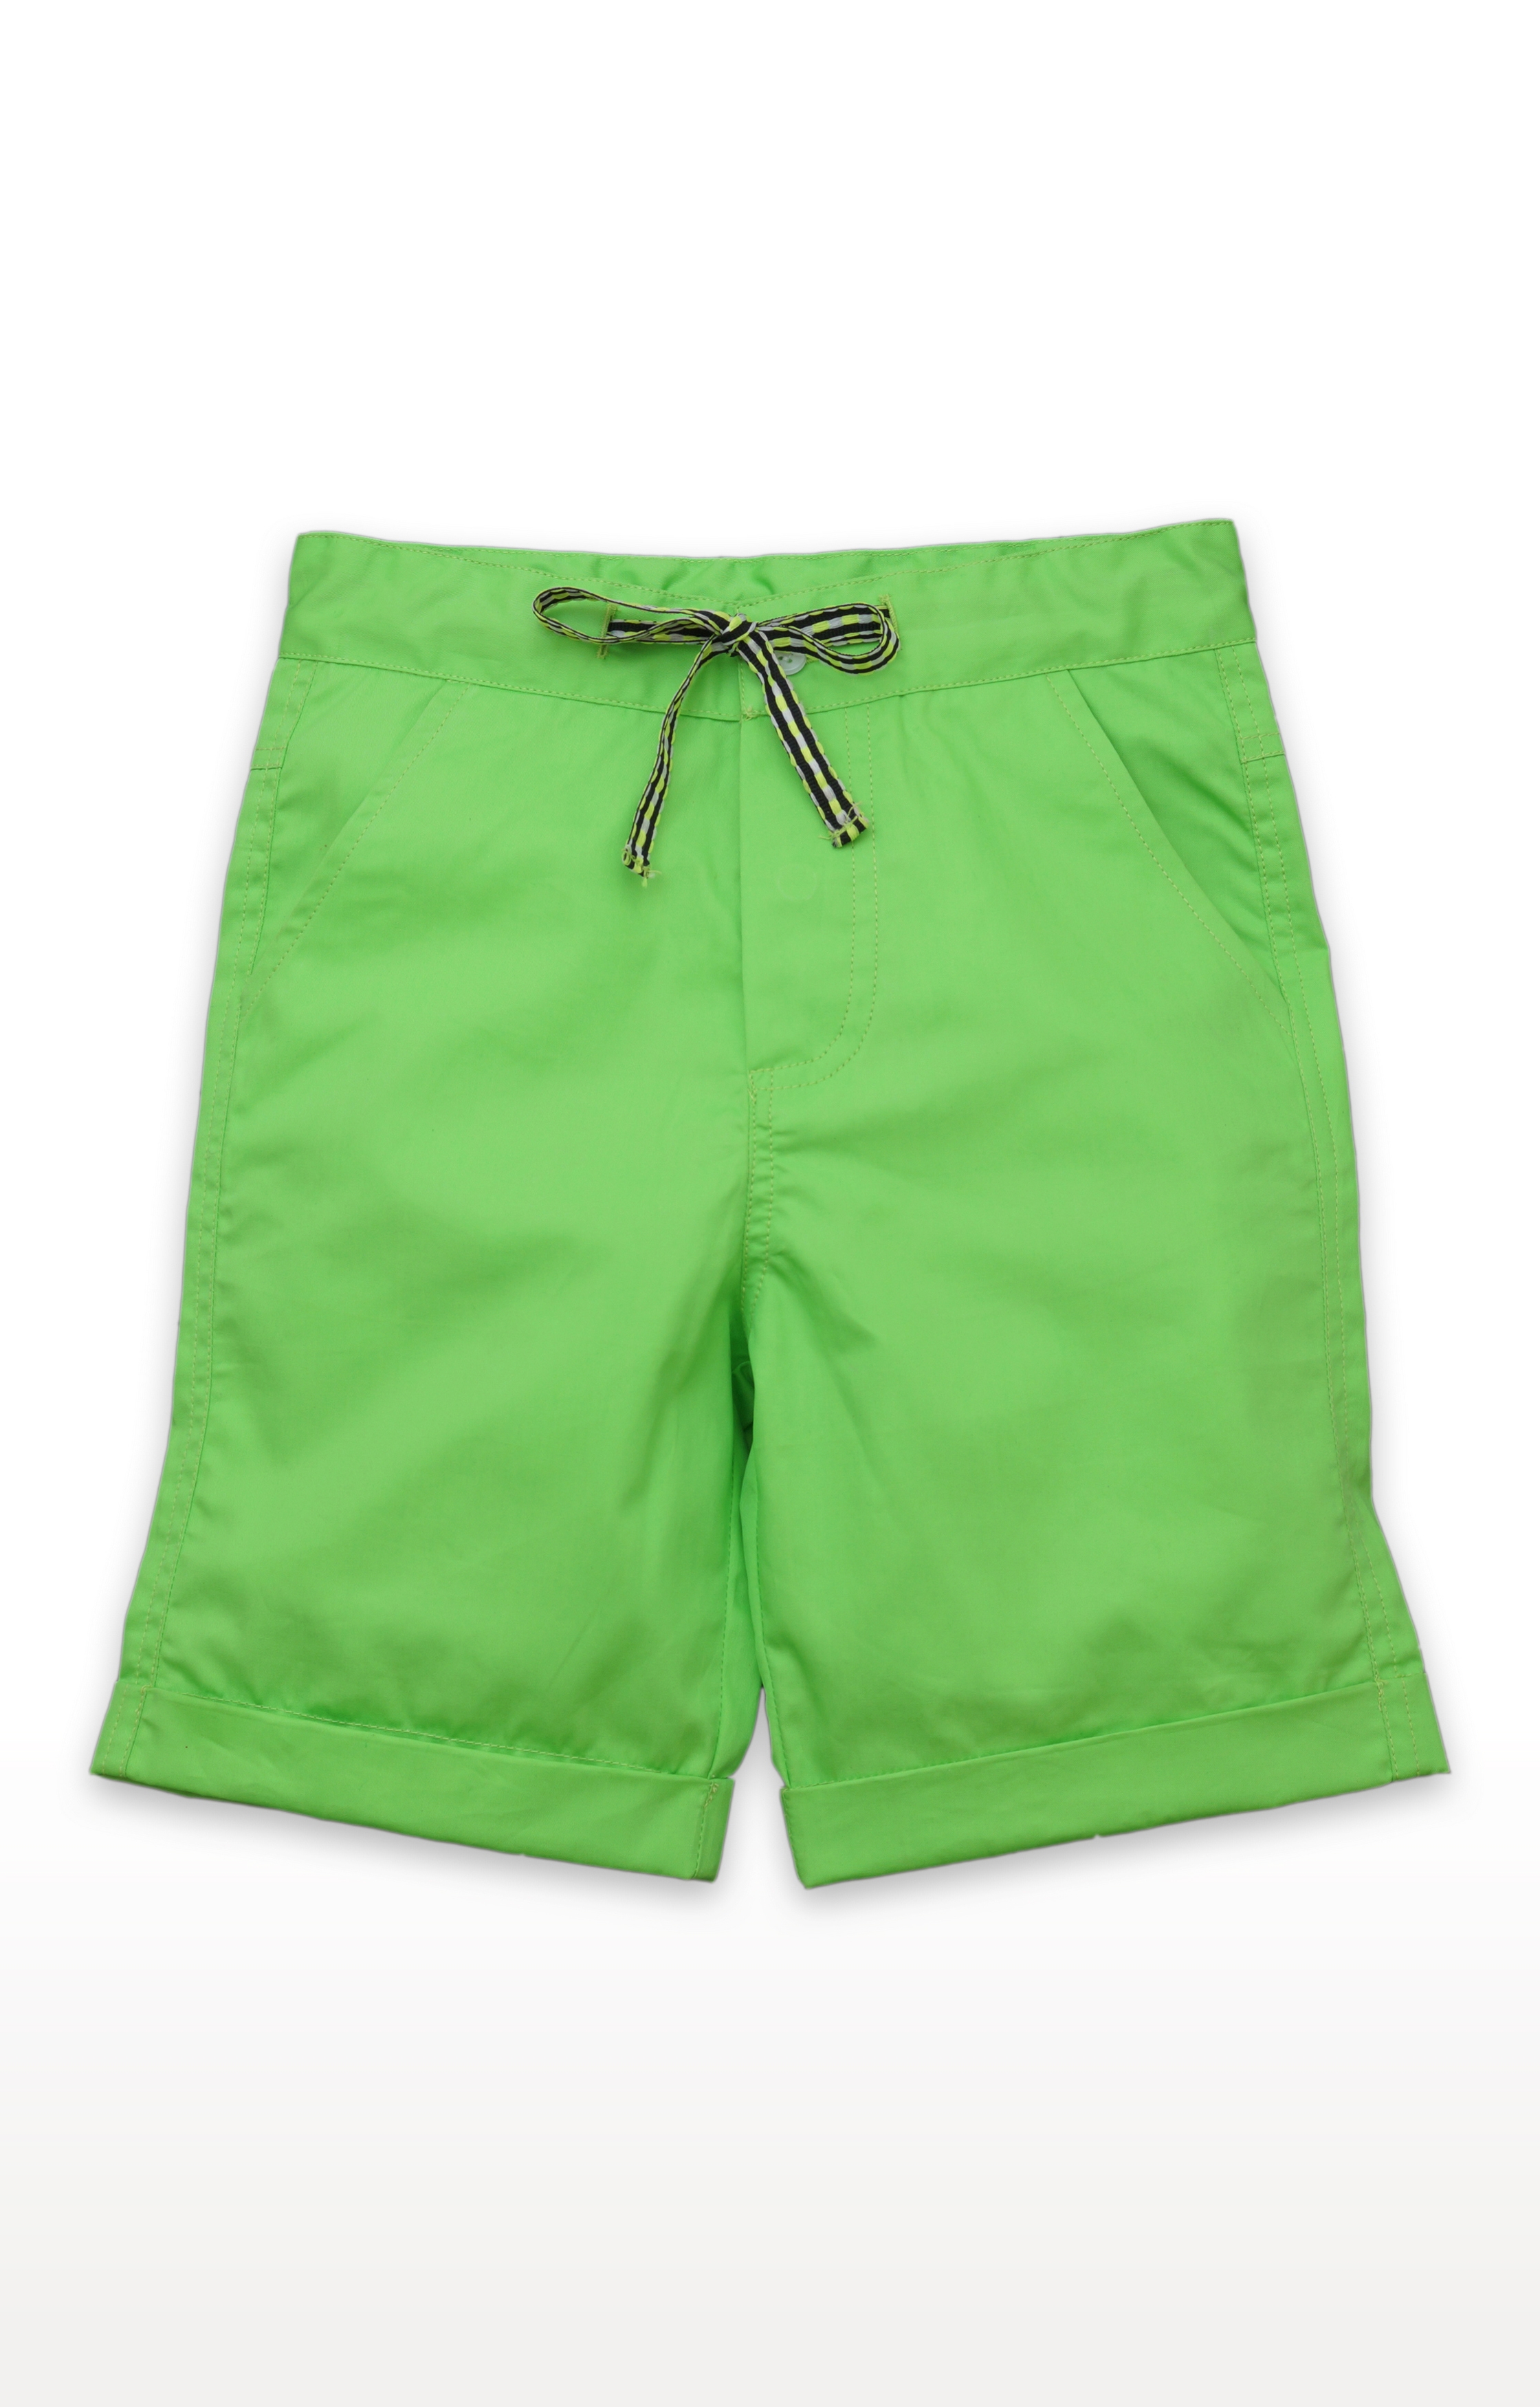 Popsicles Clothing | Popsicles Chartreuse Shorts Regular Fit For Boys - Green